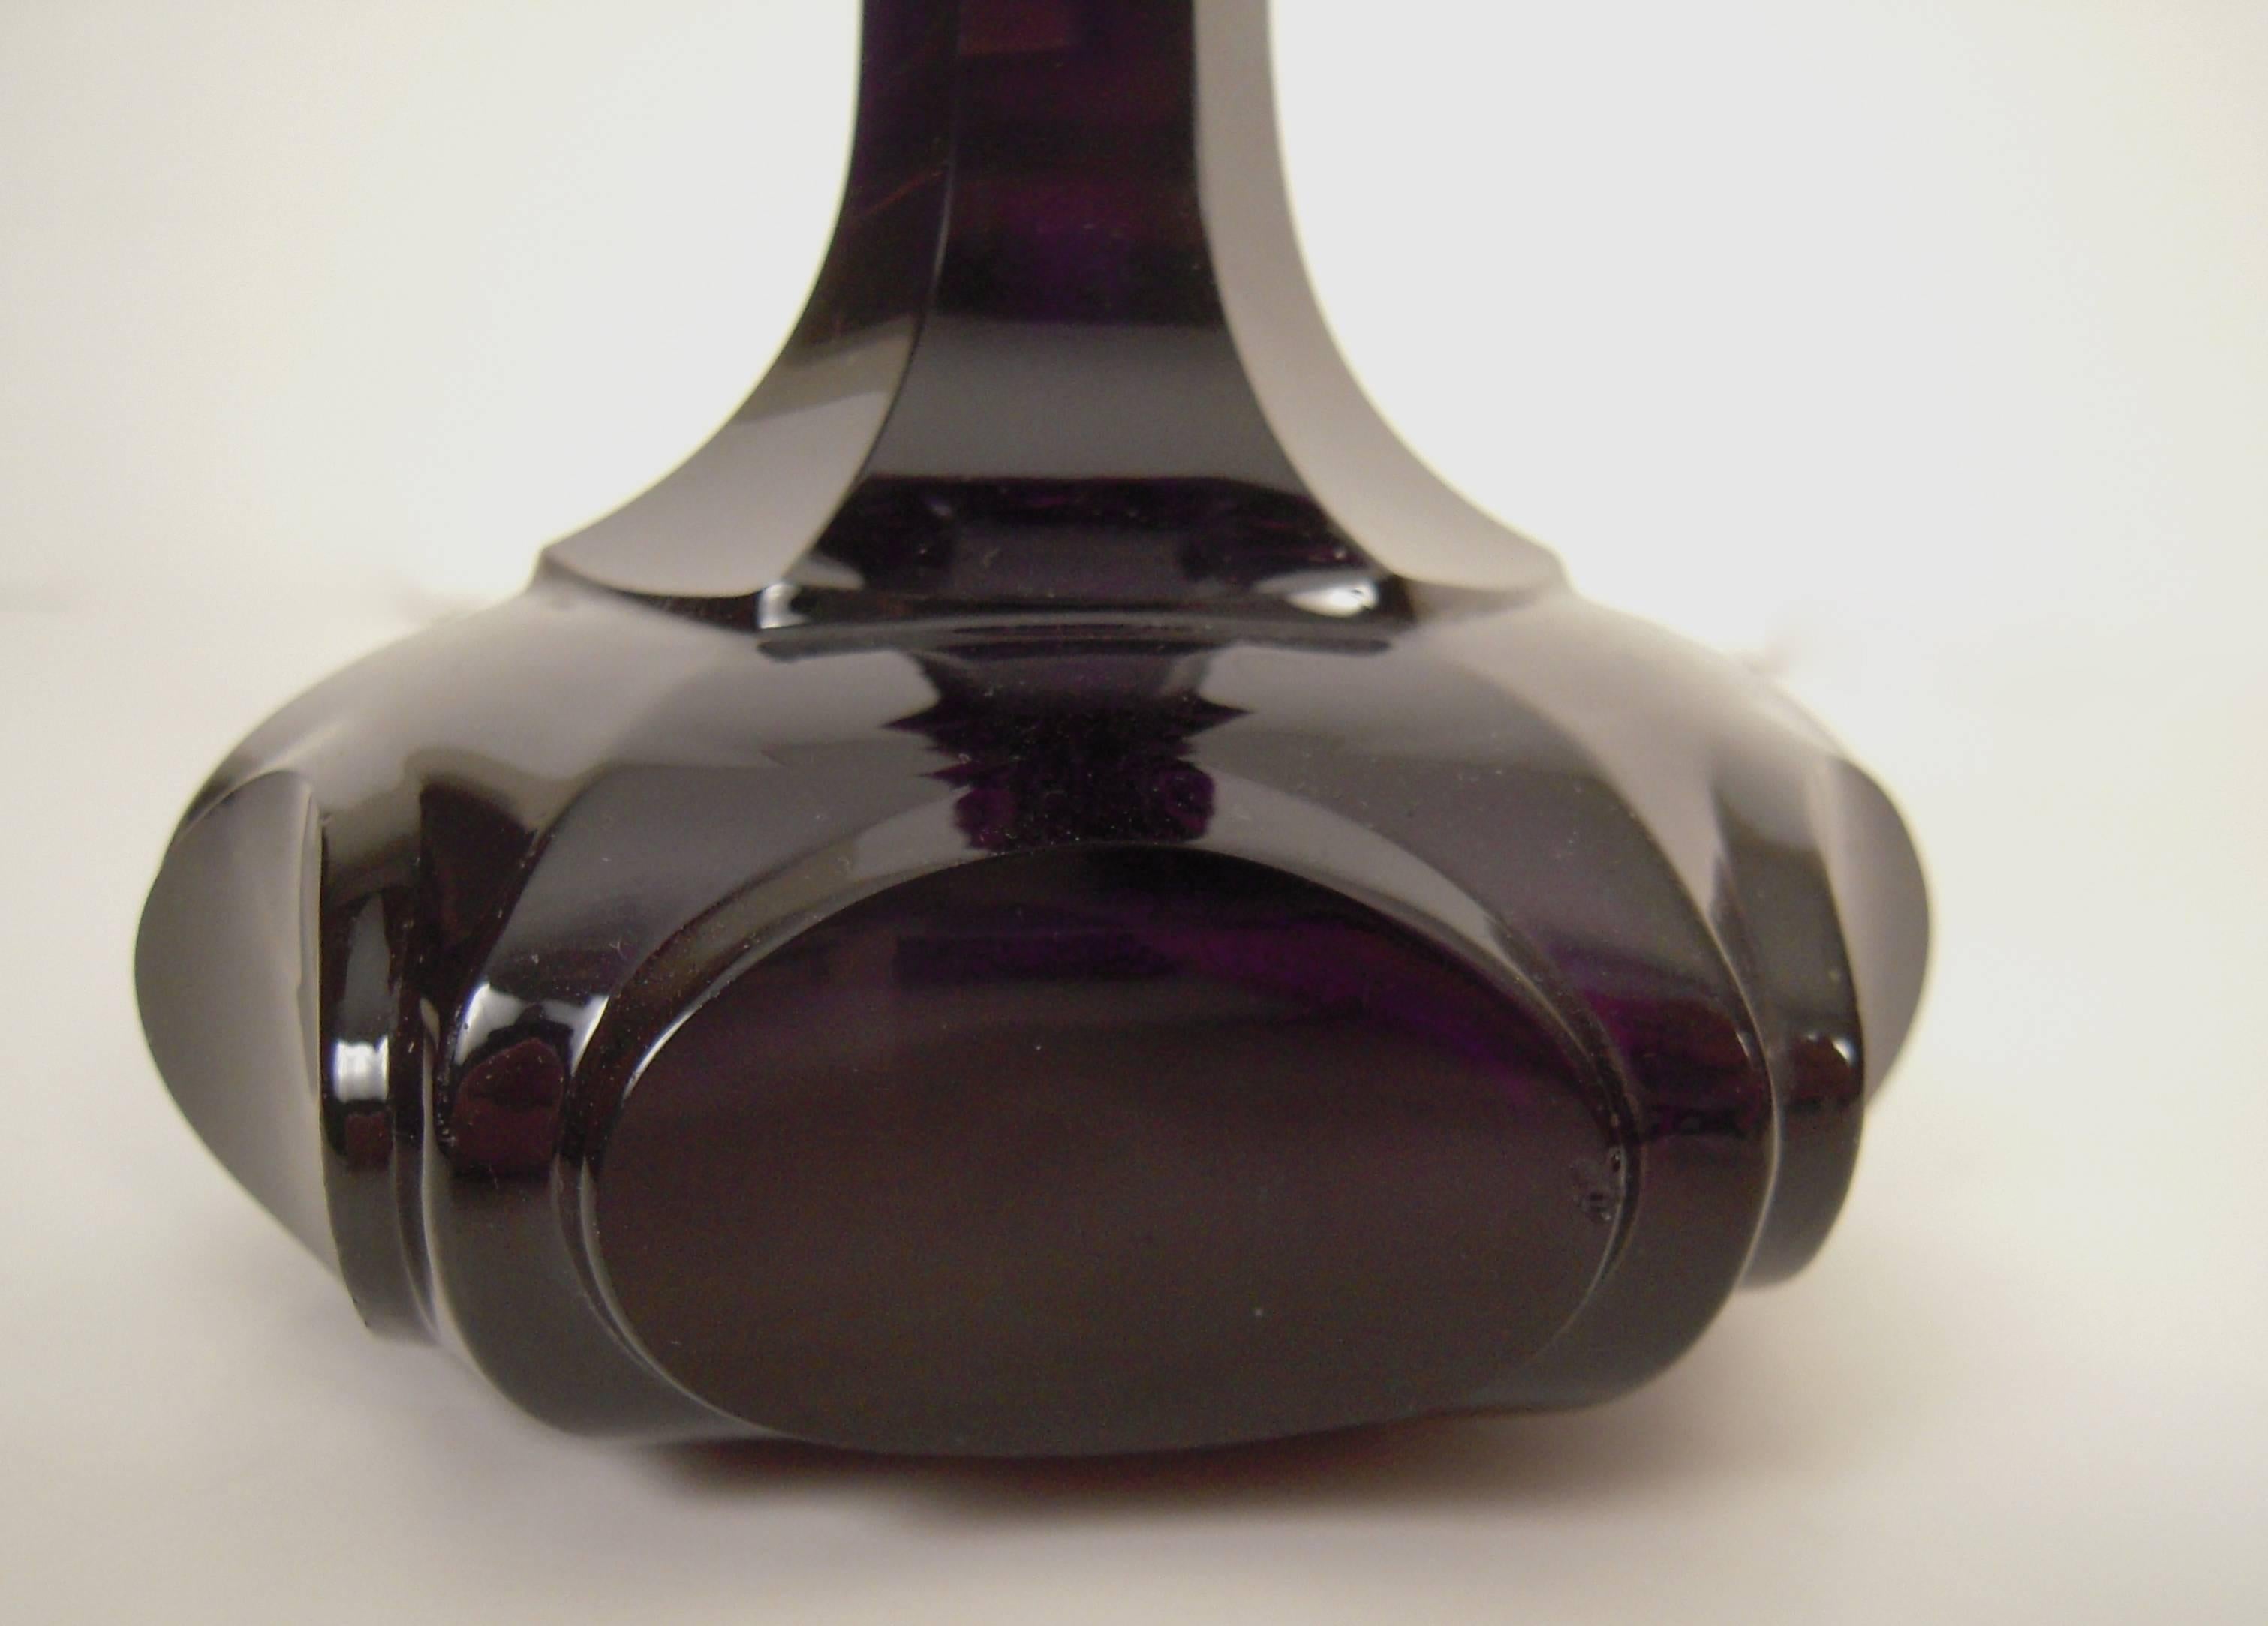 Molded Amethyst Glass Perfume Bottle with Stopper